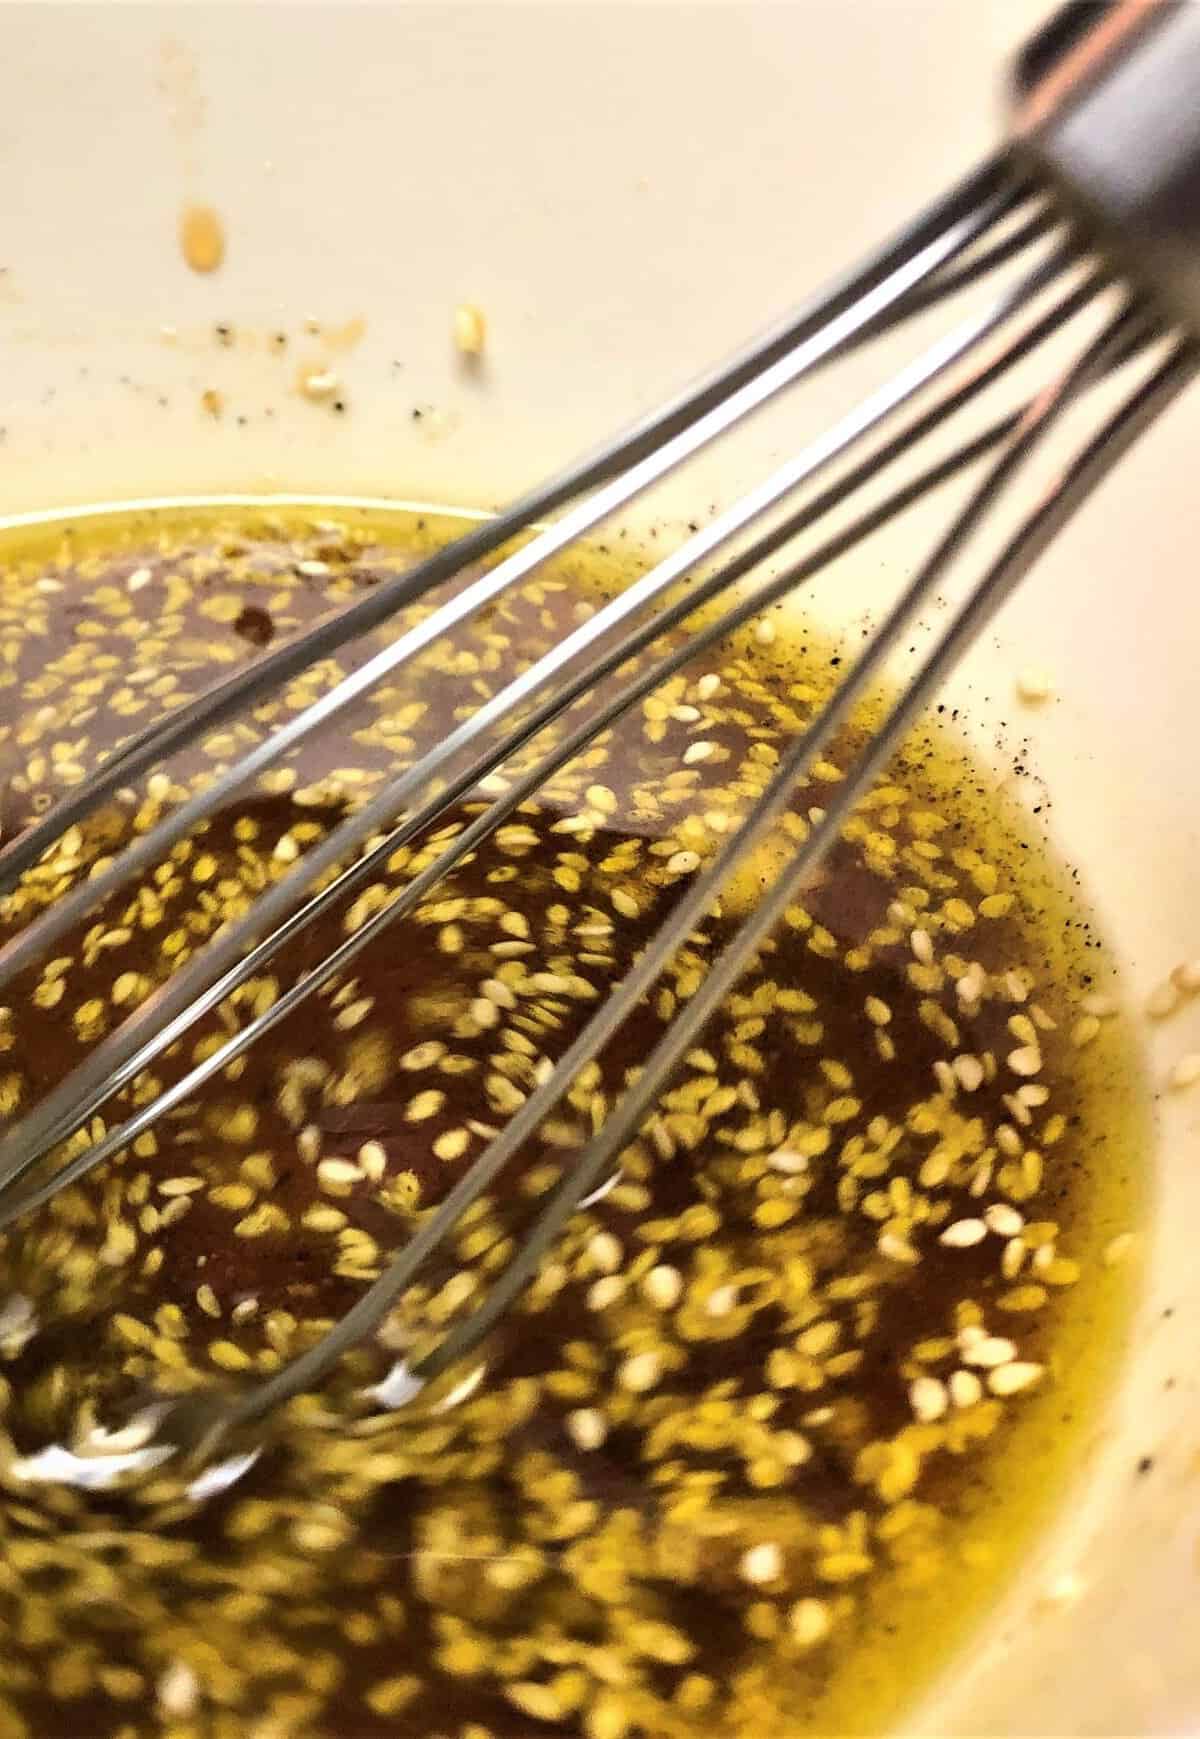 Take your salad to the next level with Asian dressing